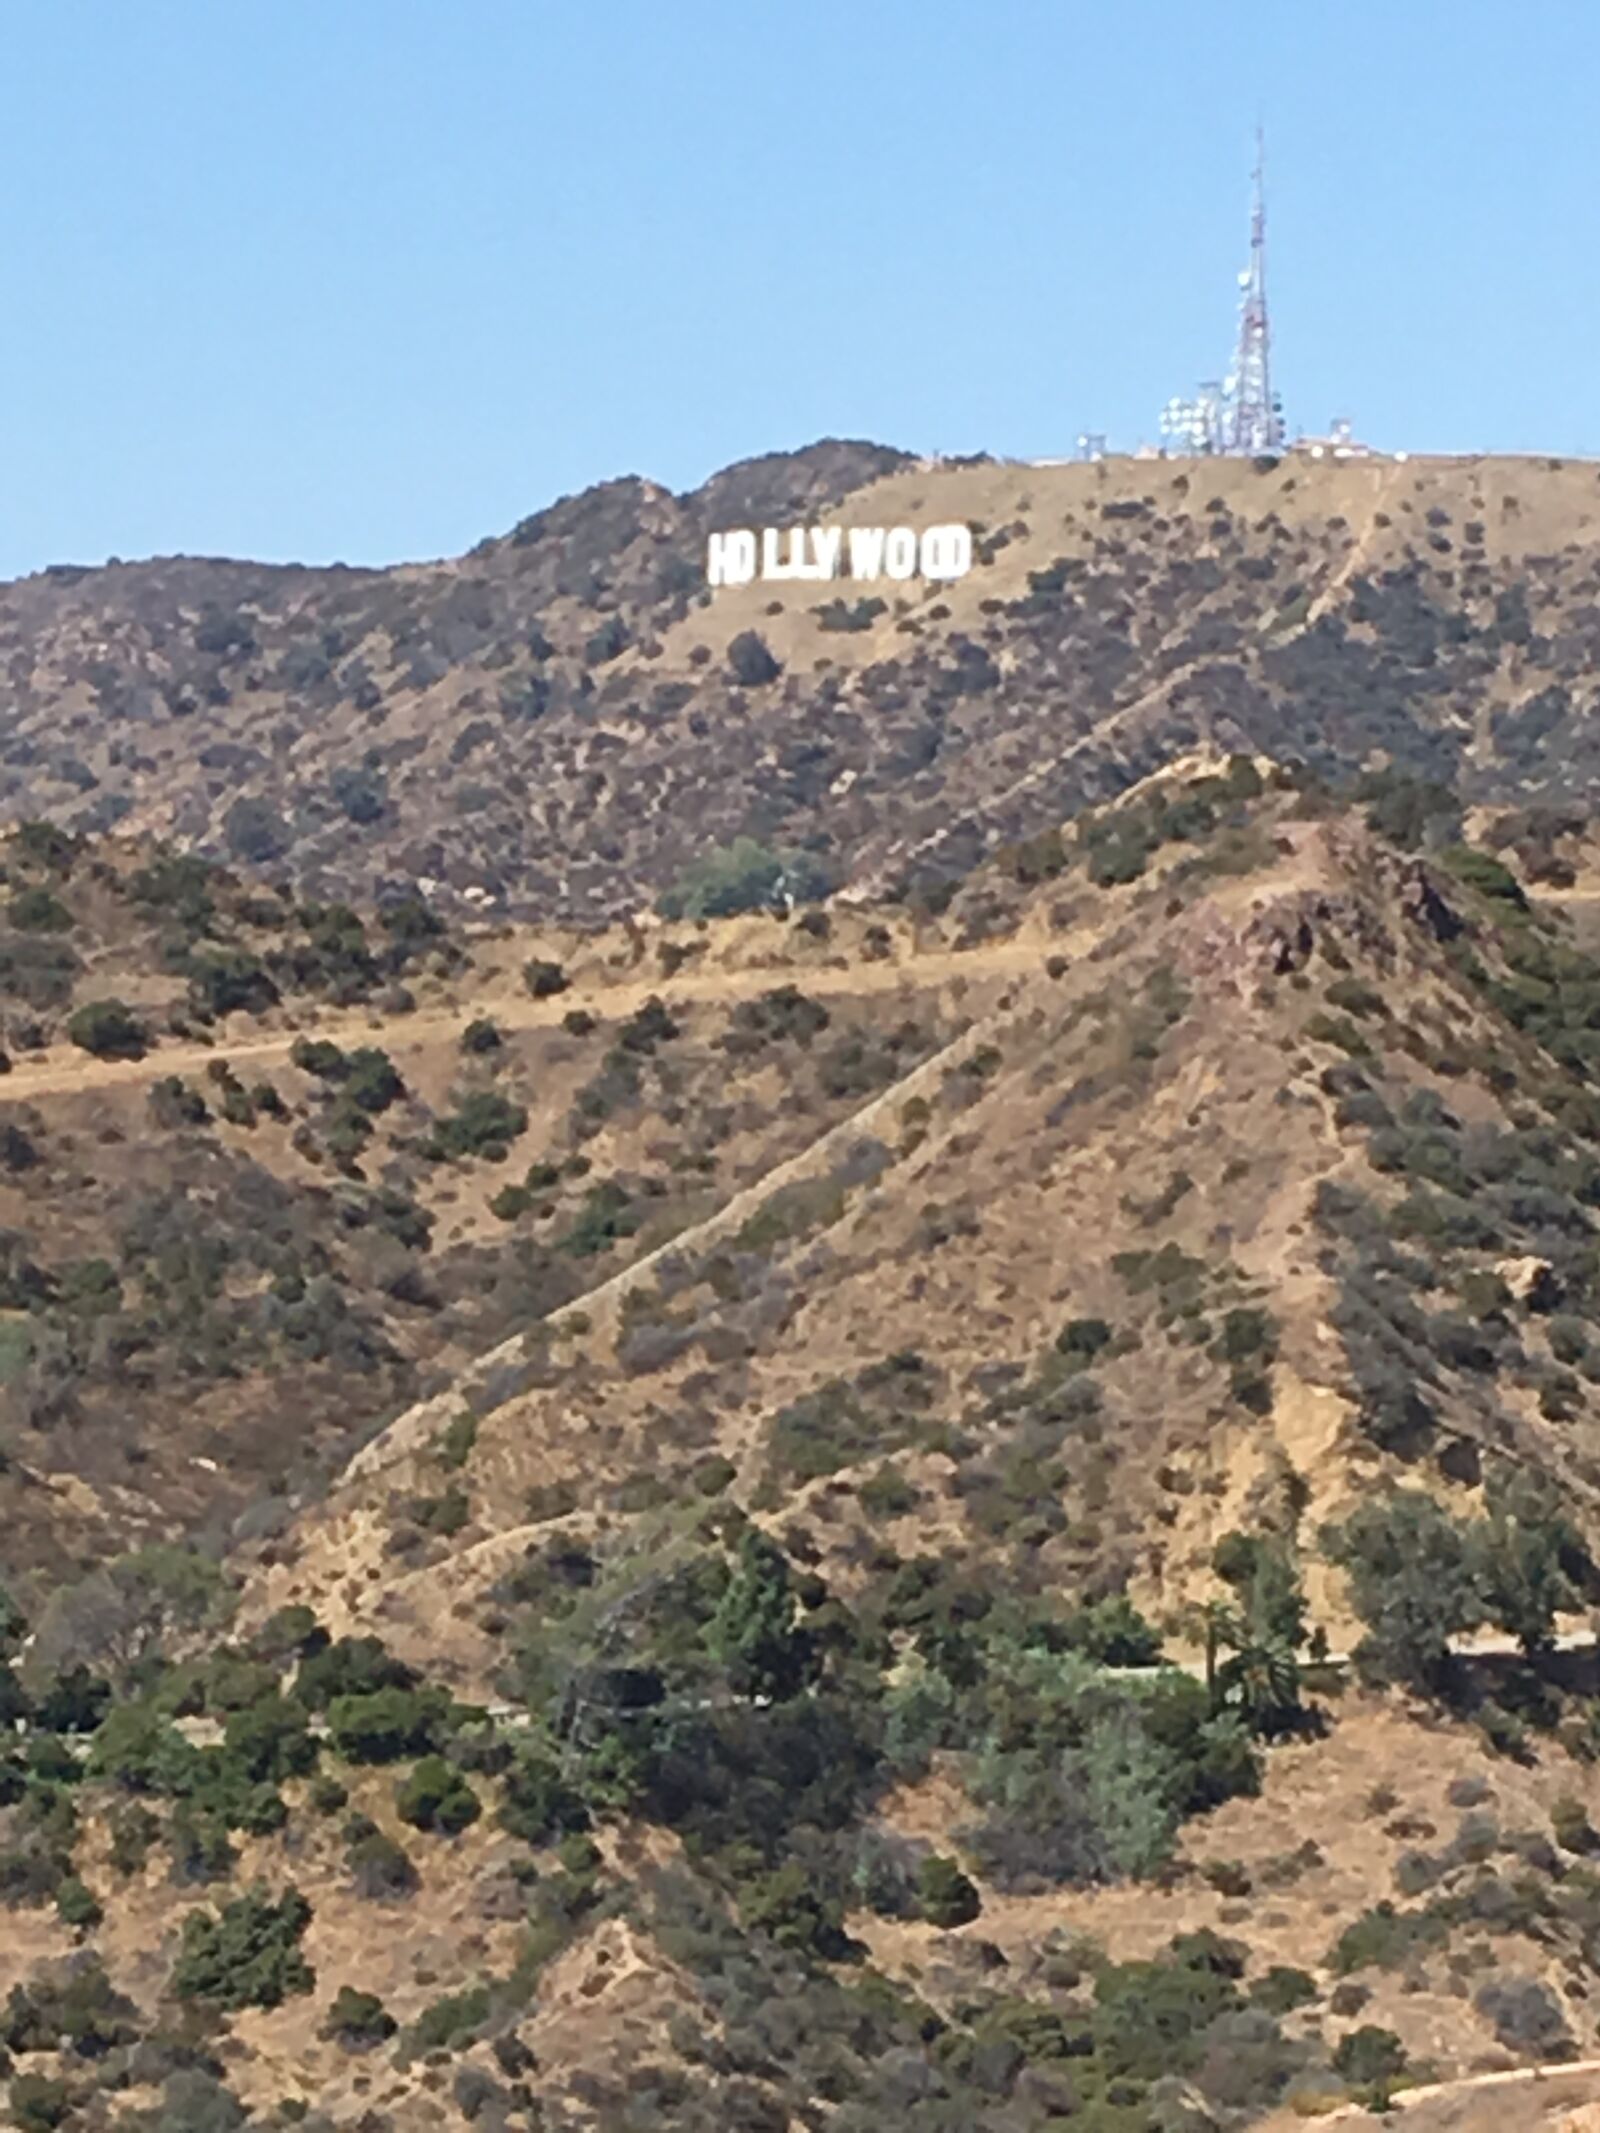 Apple iPhone 6s sample photo. Hollywood sign, hollywood, la photography